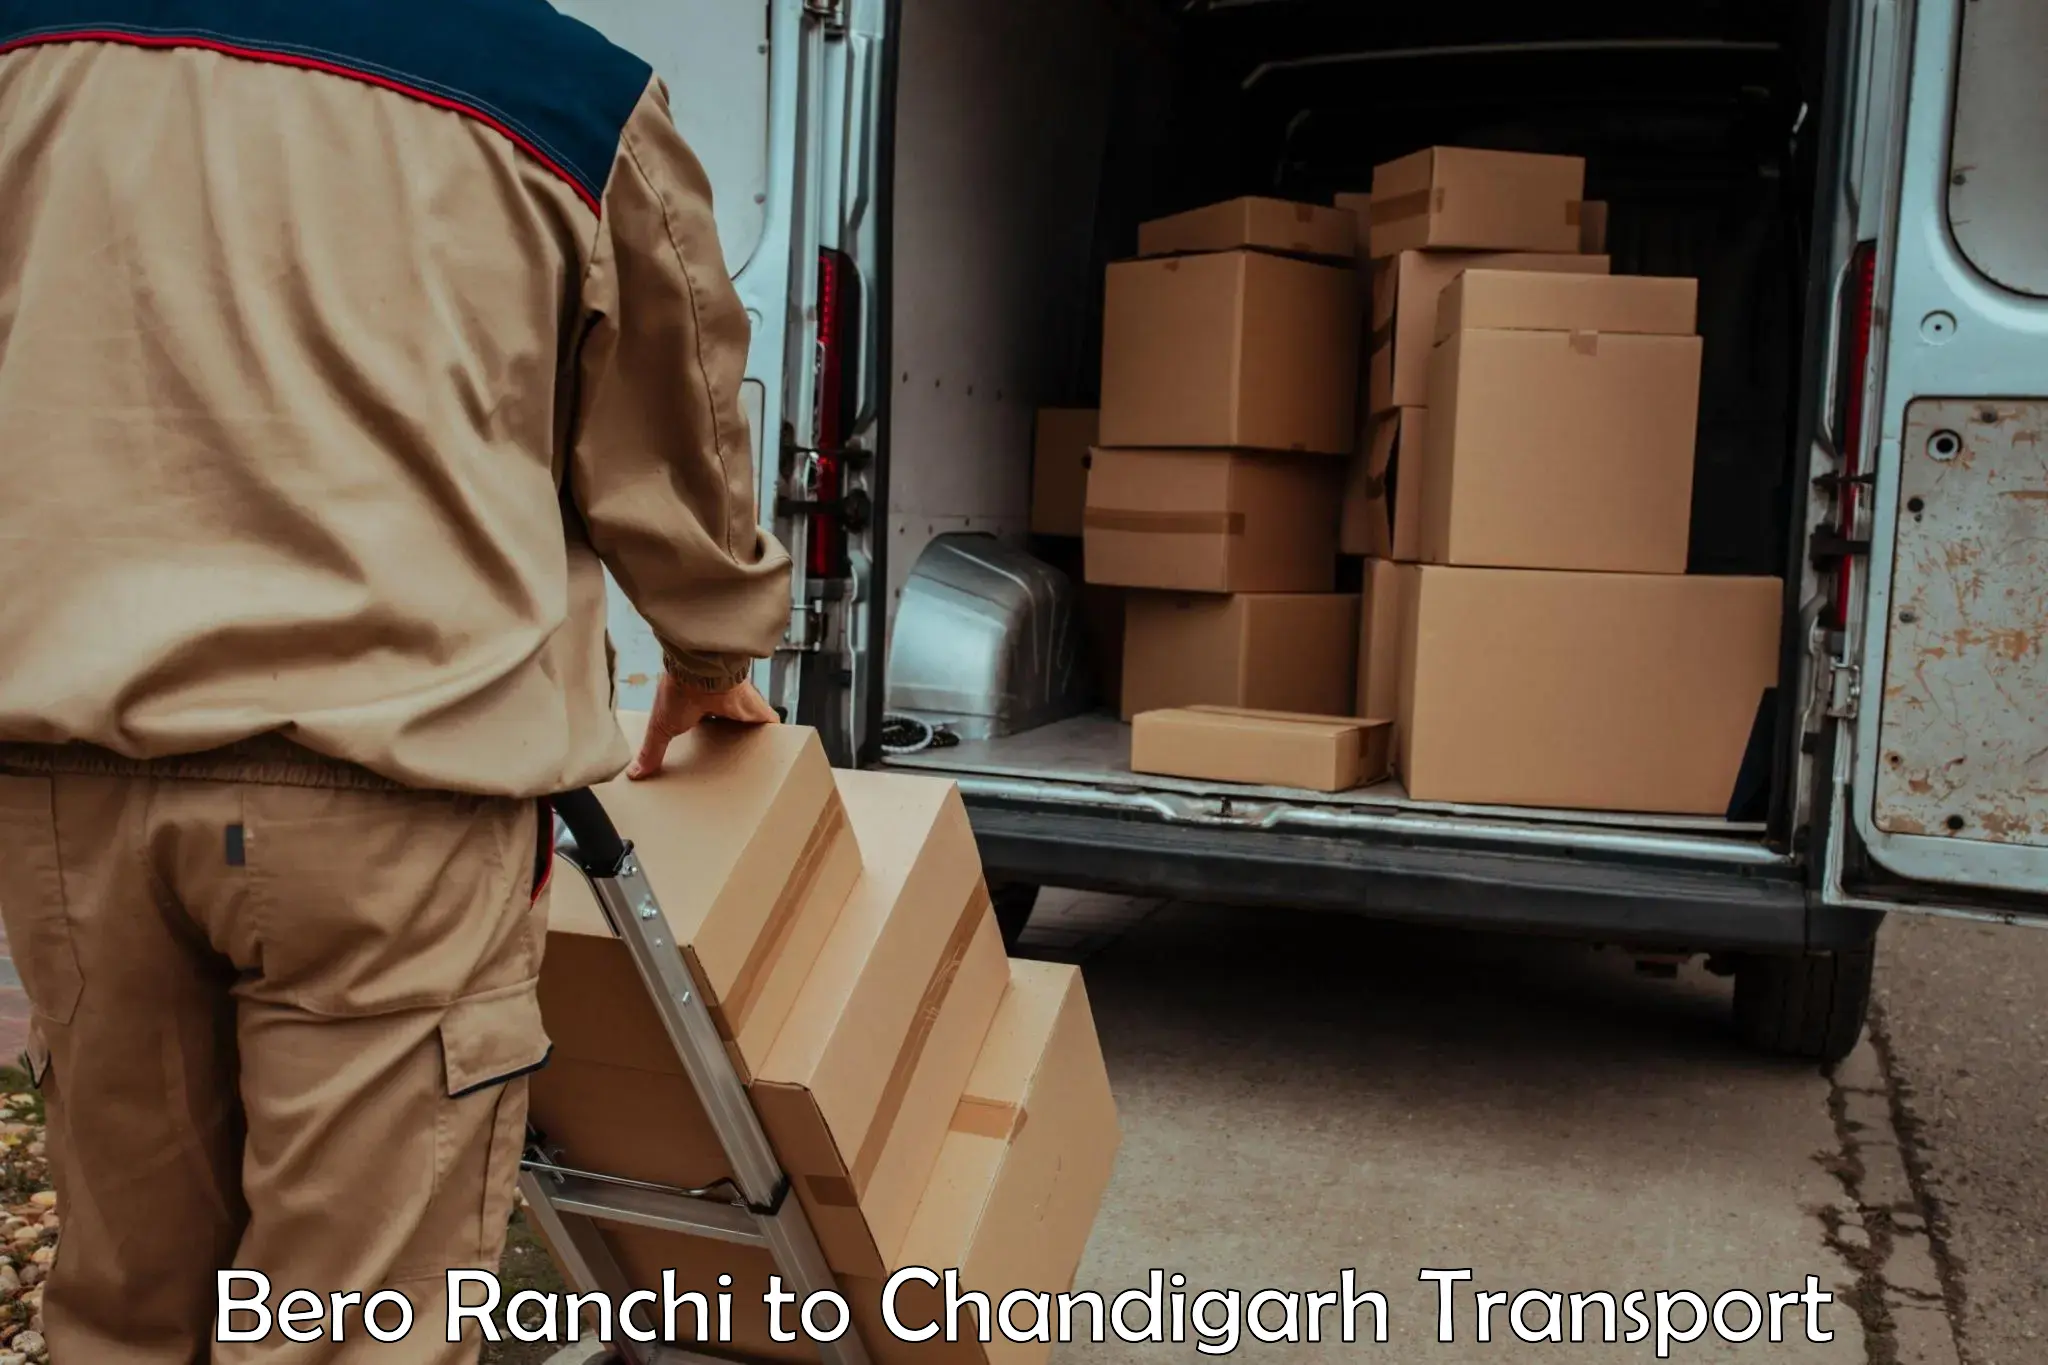 Commercial transport service Bero Ranchi to Chandigarh